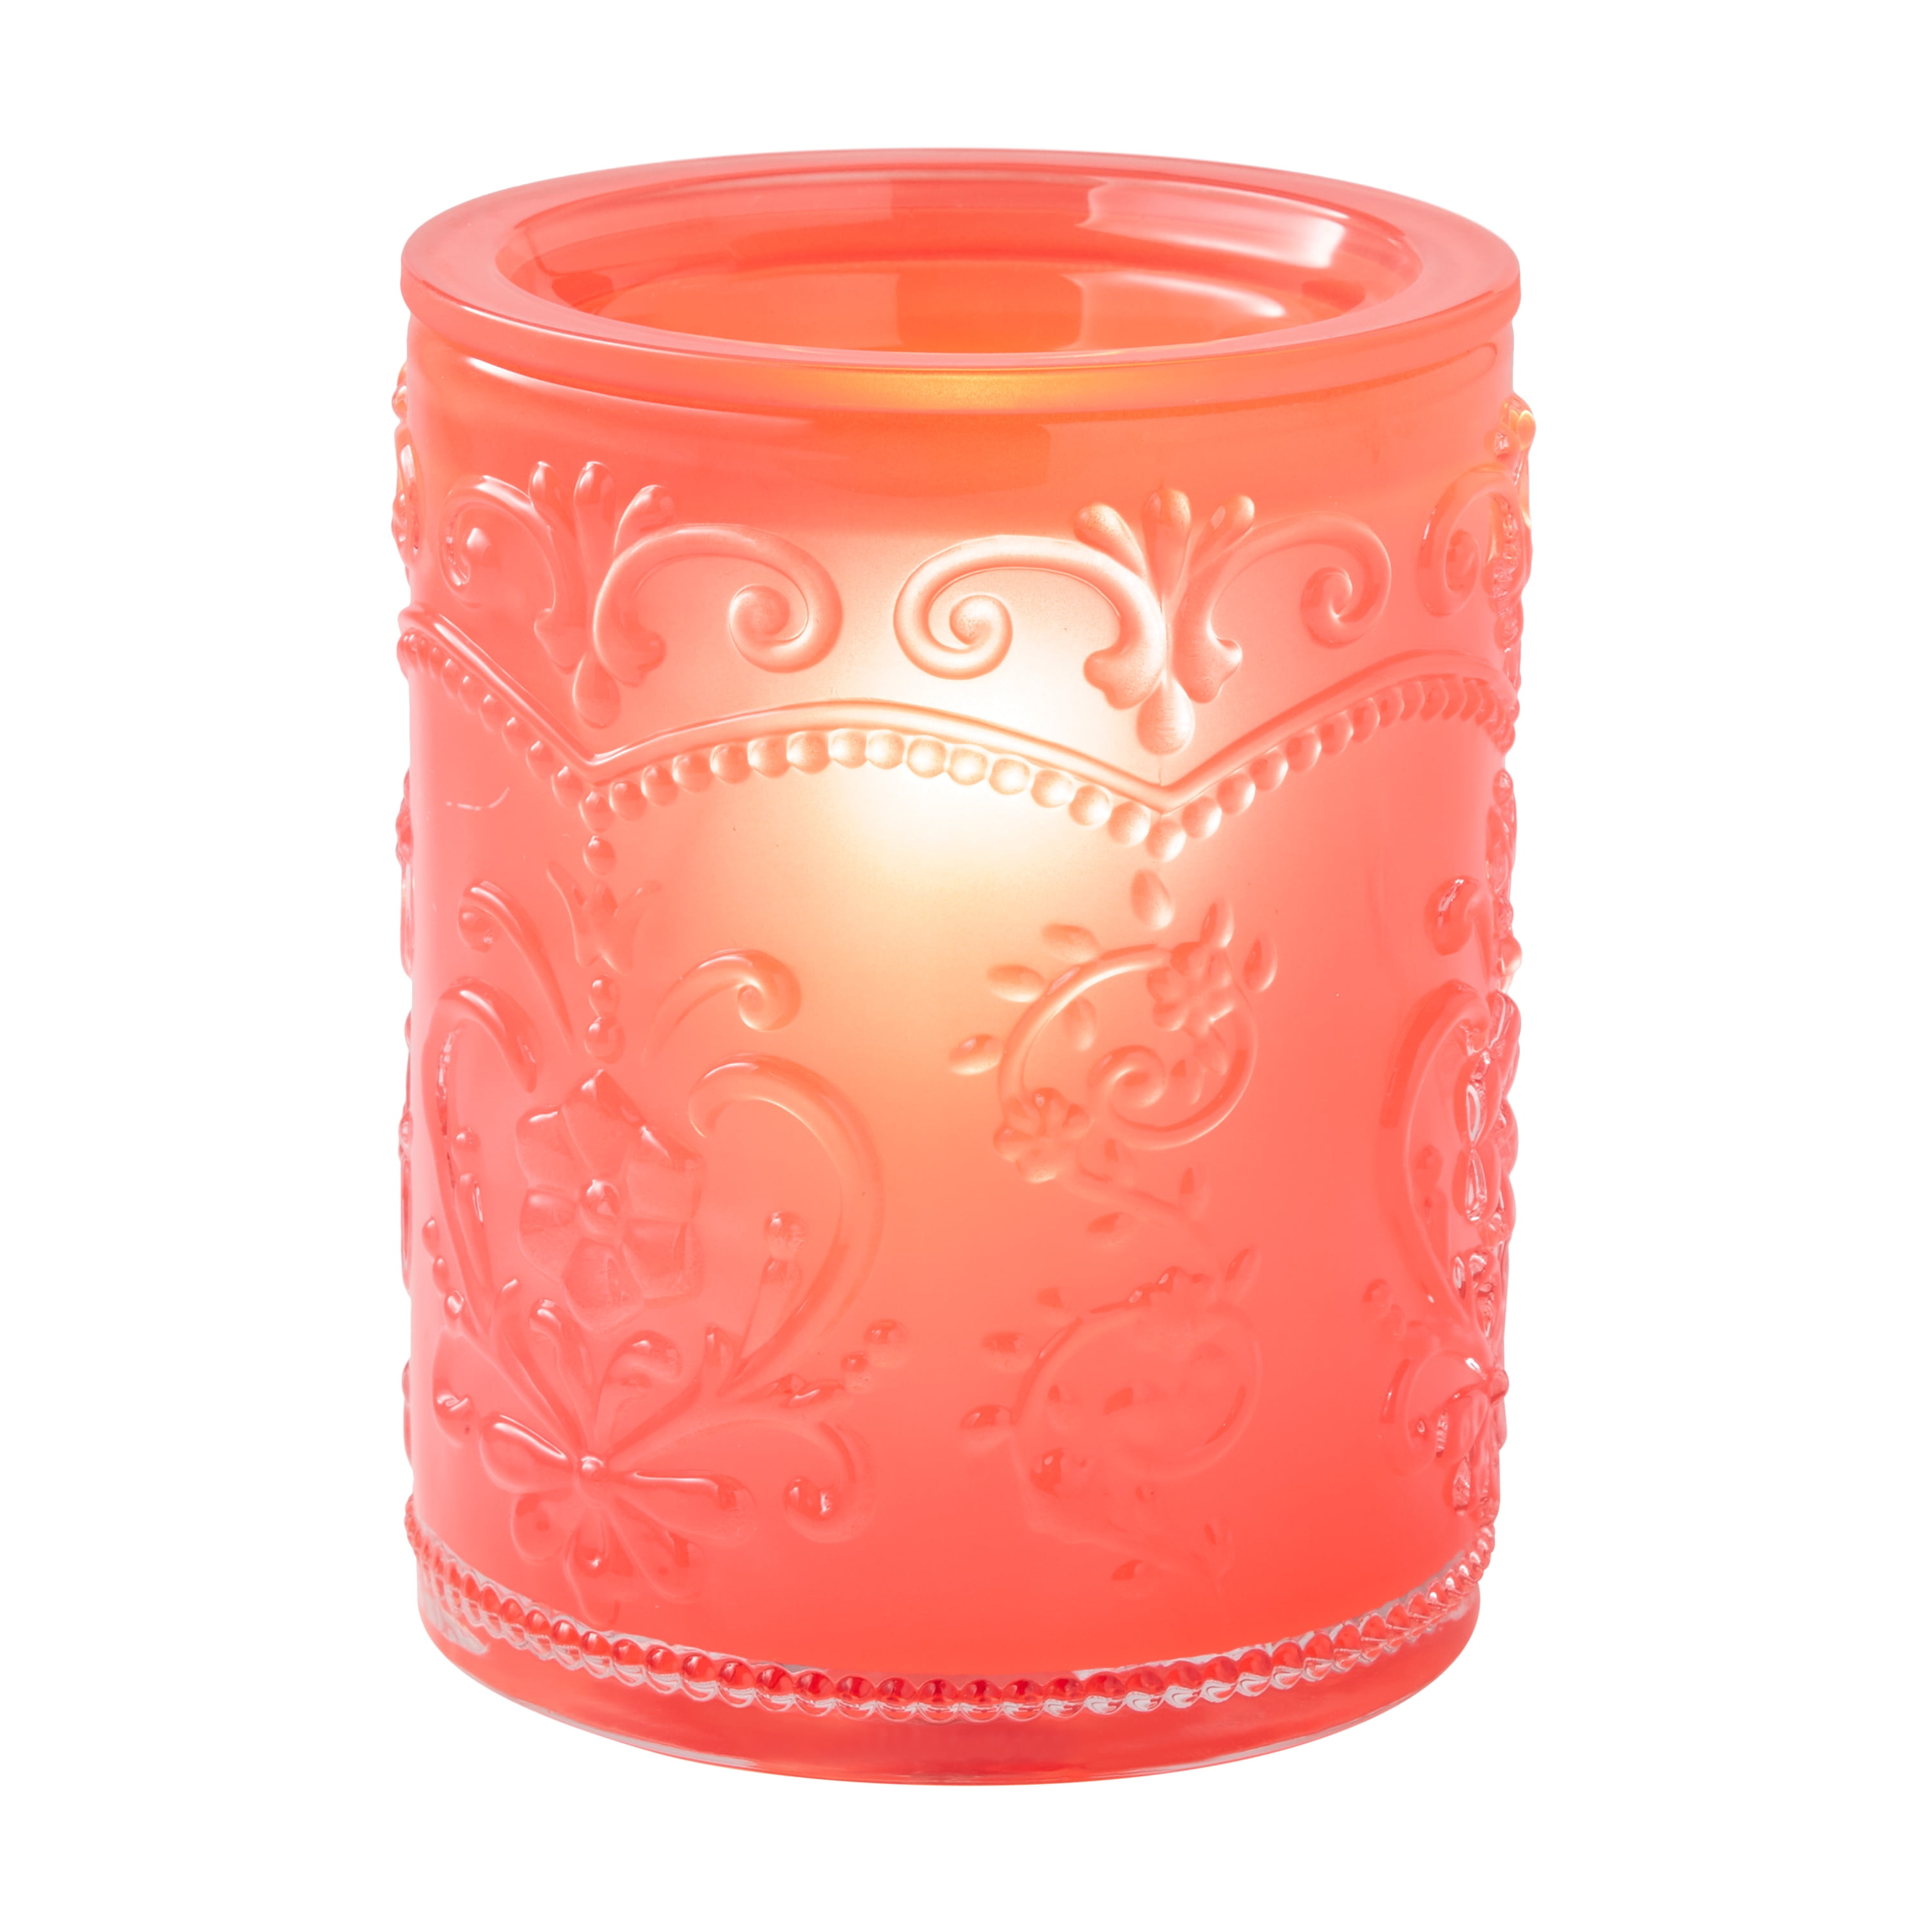 The Pioneer Woman Fragrance Warmers at Walmart - Where to Buy Ree  Drummond's Wax Warmers and Melts